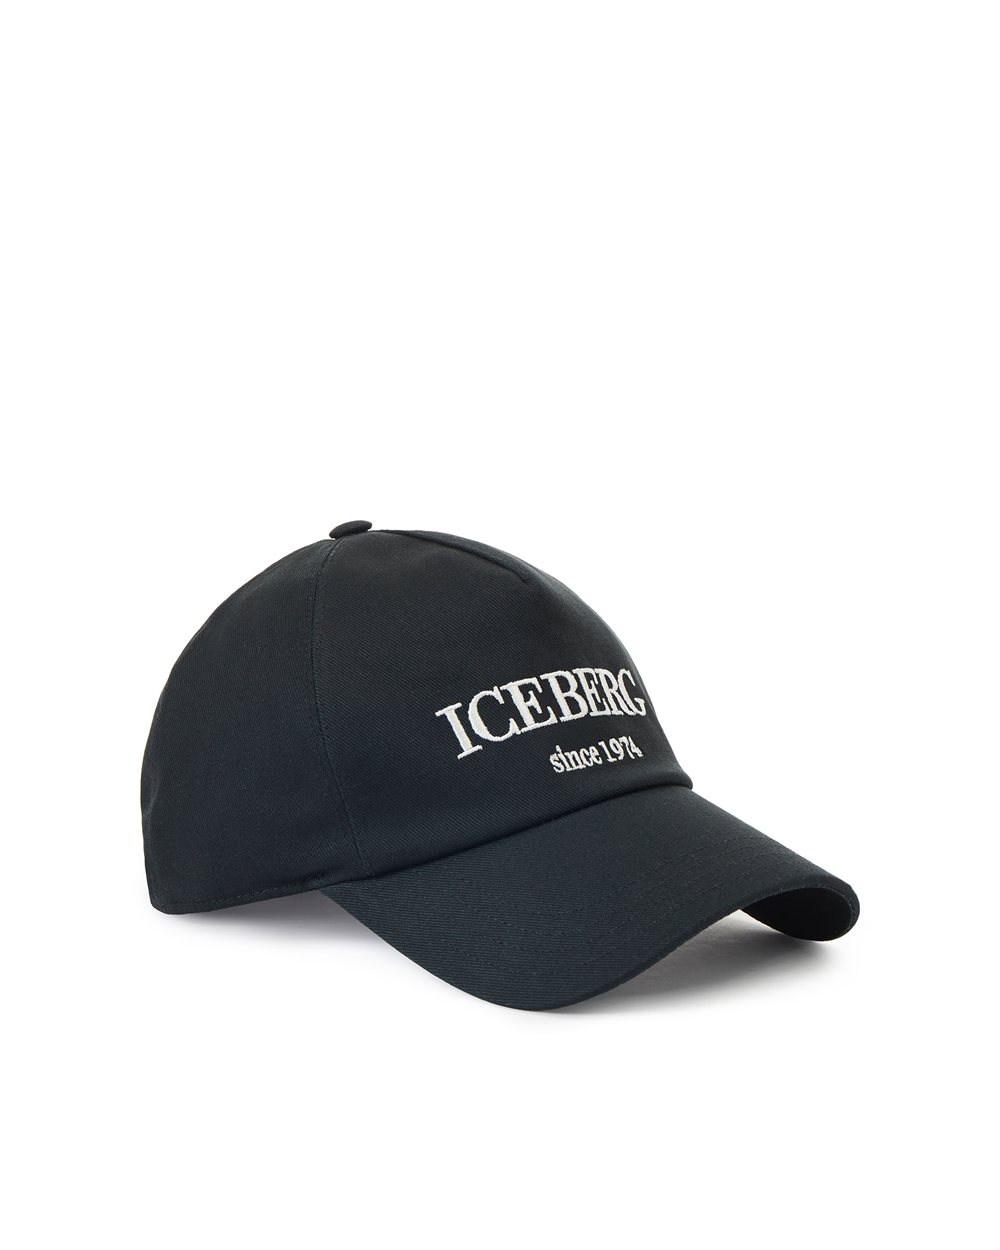 Baseball hat with logo - Accessories | Iceberg - Official Website